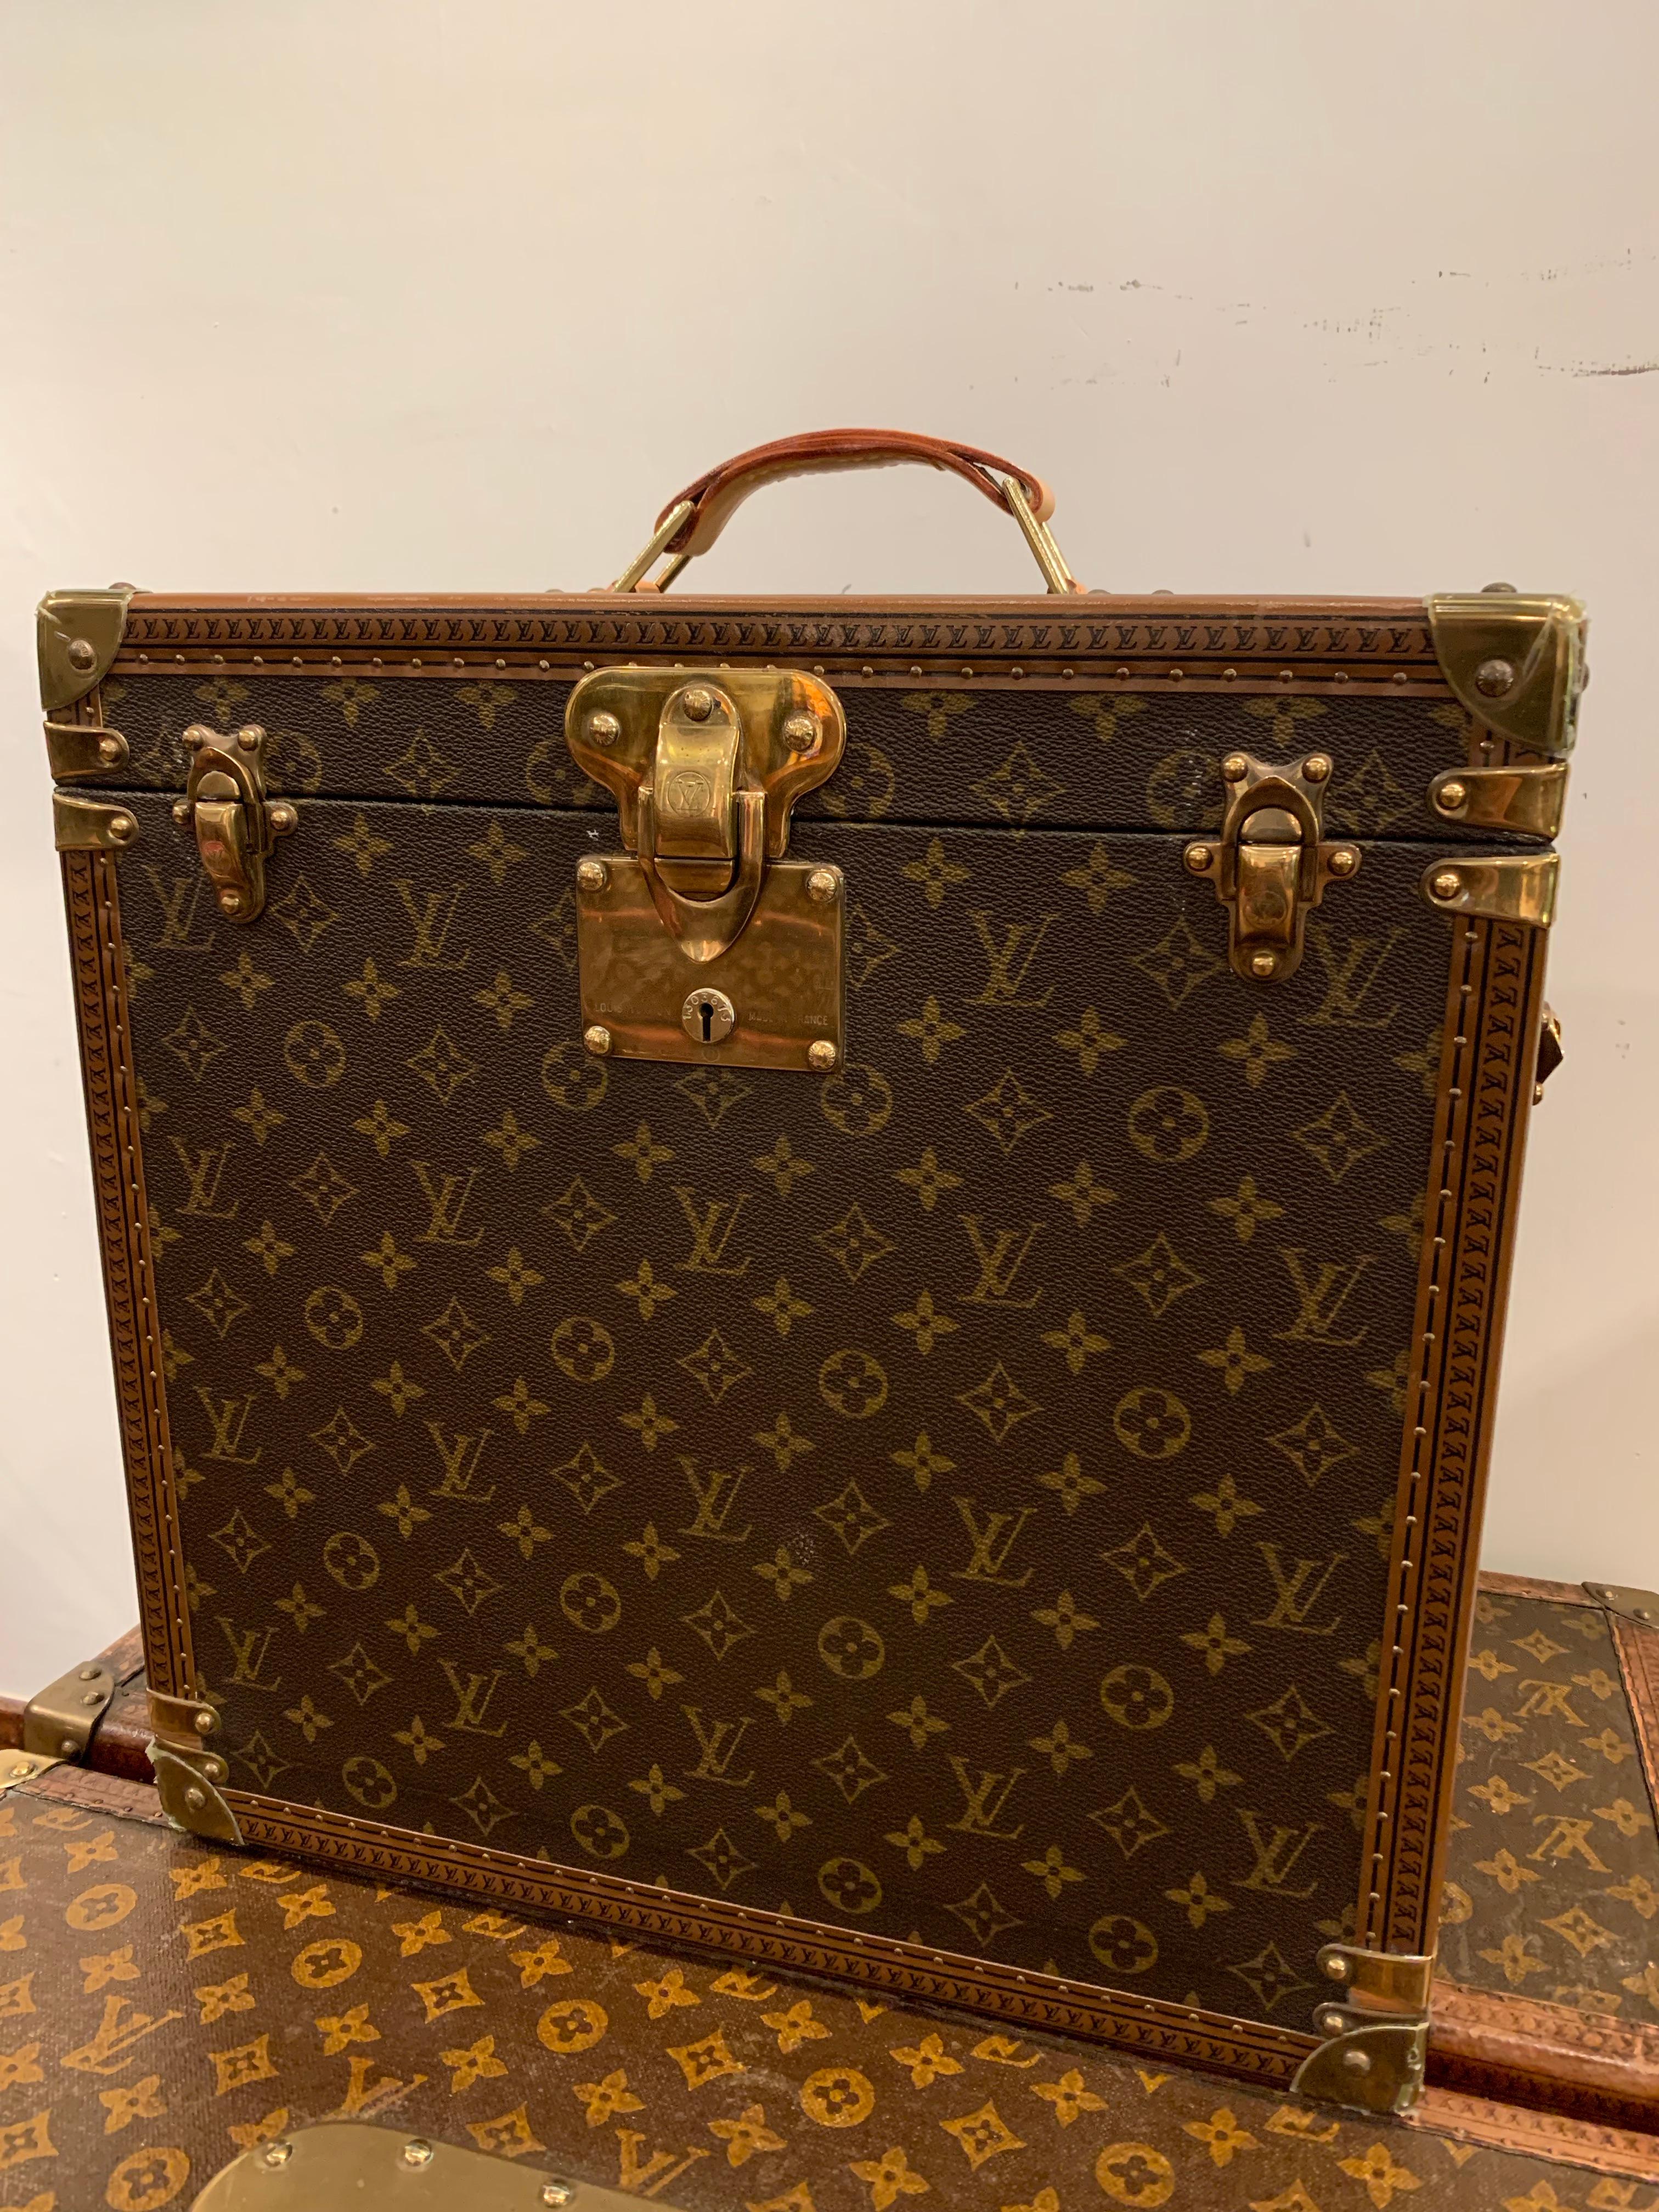 This very rare special order Louis Vuitton trunk to store Watches is immaculate as never used, with the still the Louis Vuitton plastic protection on the brass corners.

Louis Vuitton created just few of these trunks as it has to be ordered and it